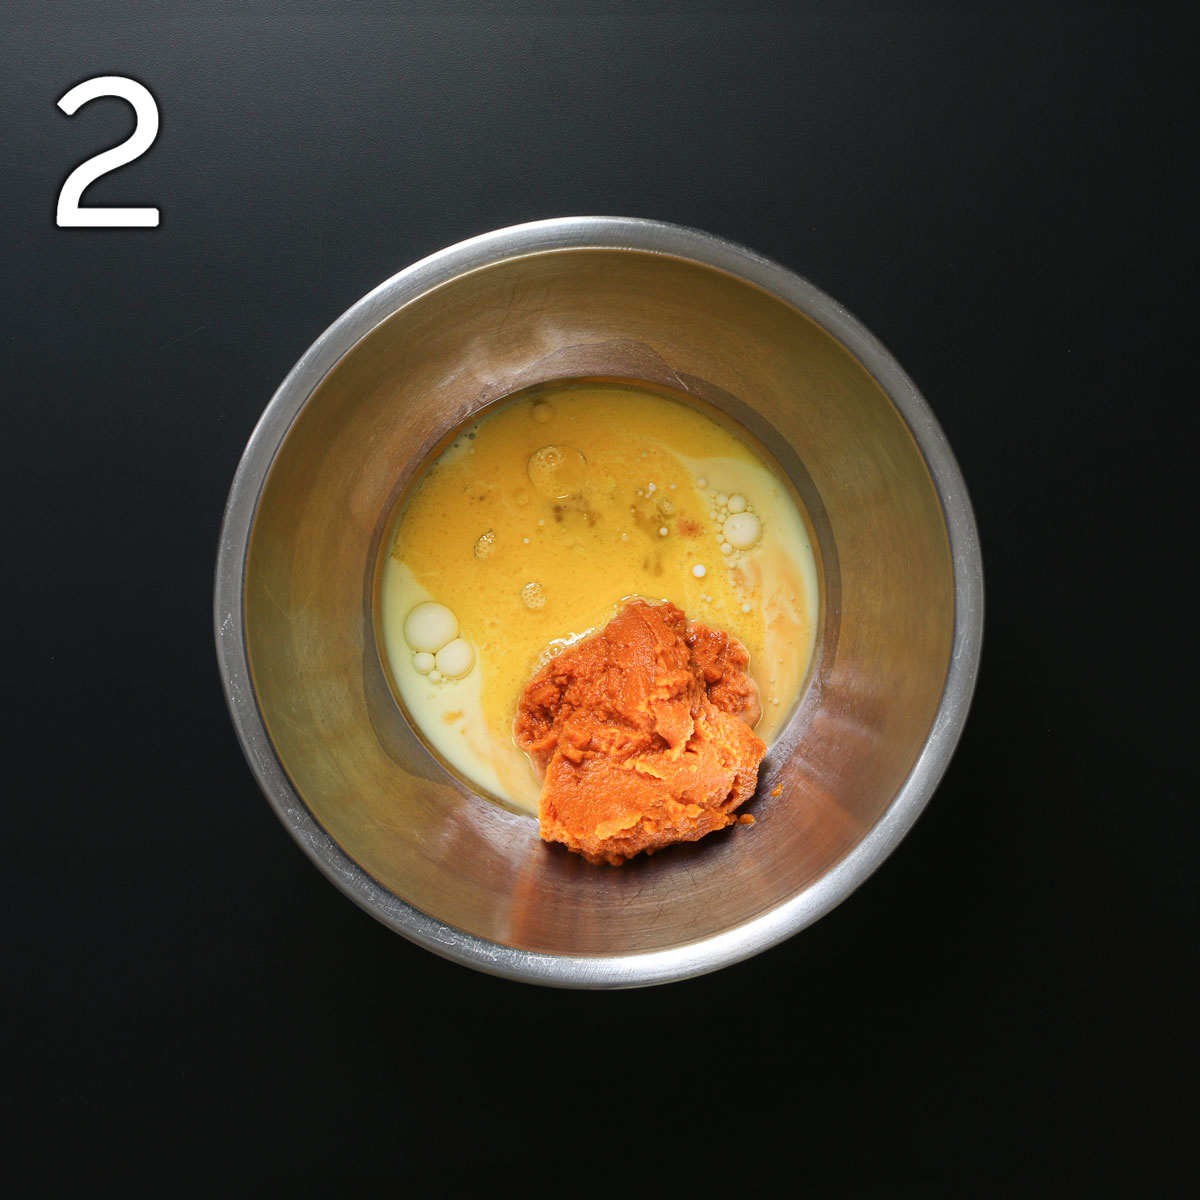 pumpkin, oil, milk, and egg in a metal mixing bowl.